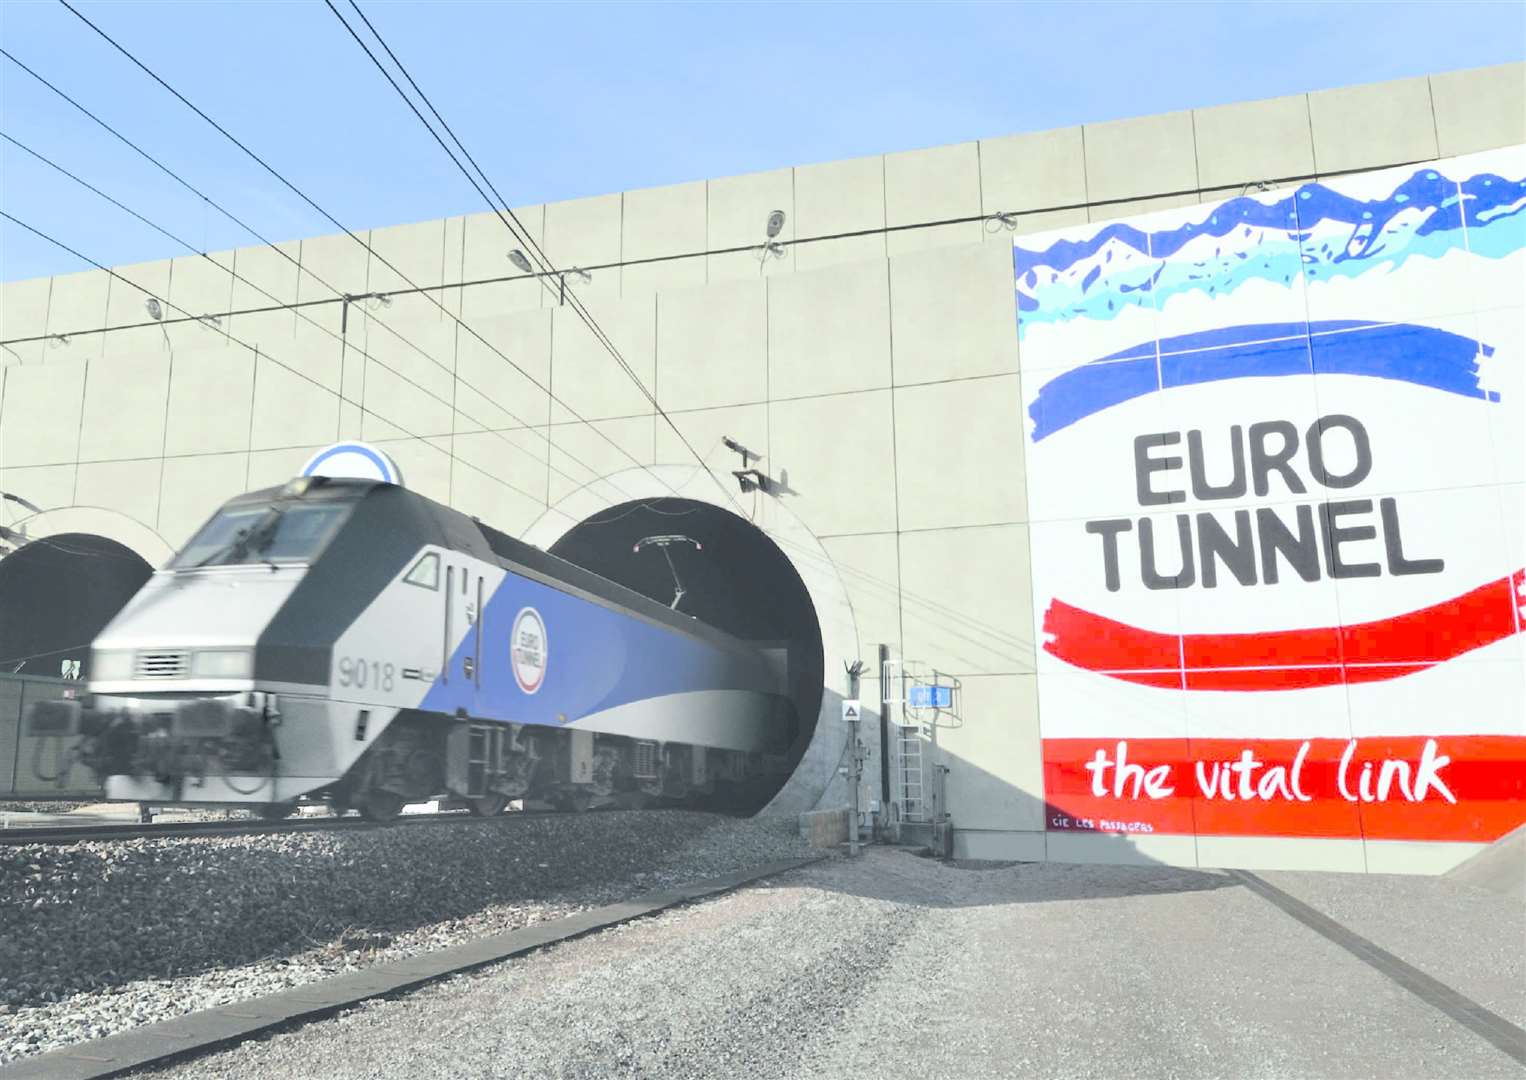 Eurotunnel profits are expected to be hit hard by the health crisis